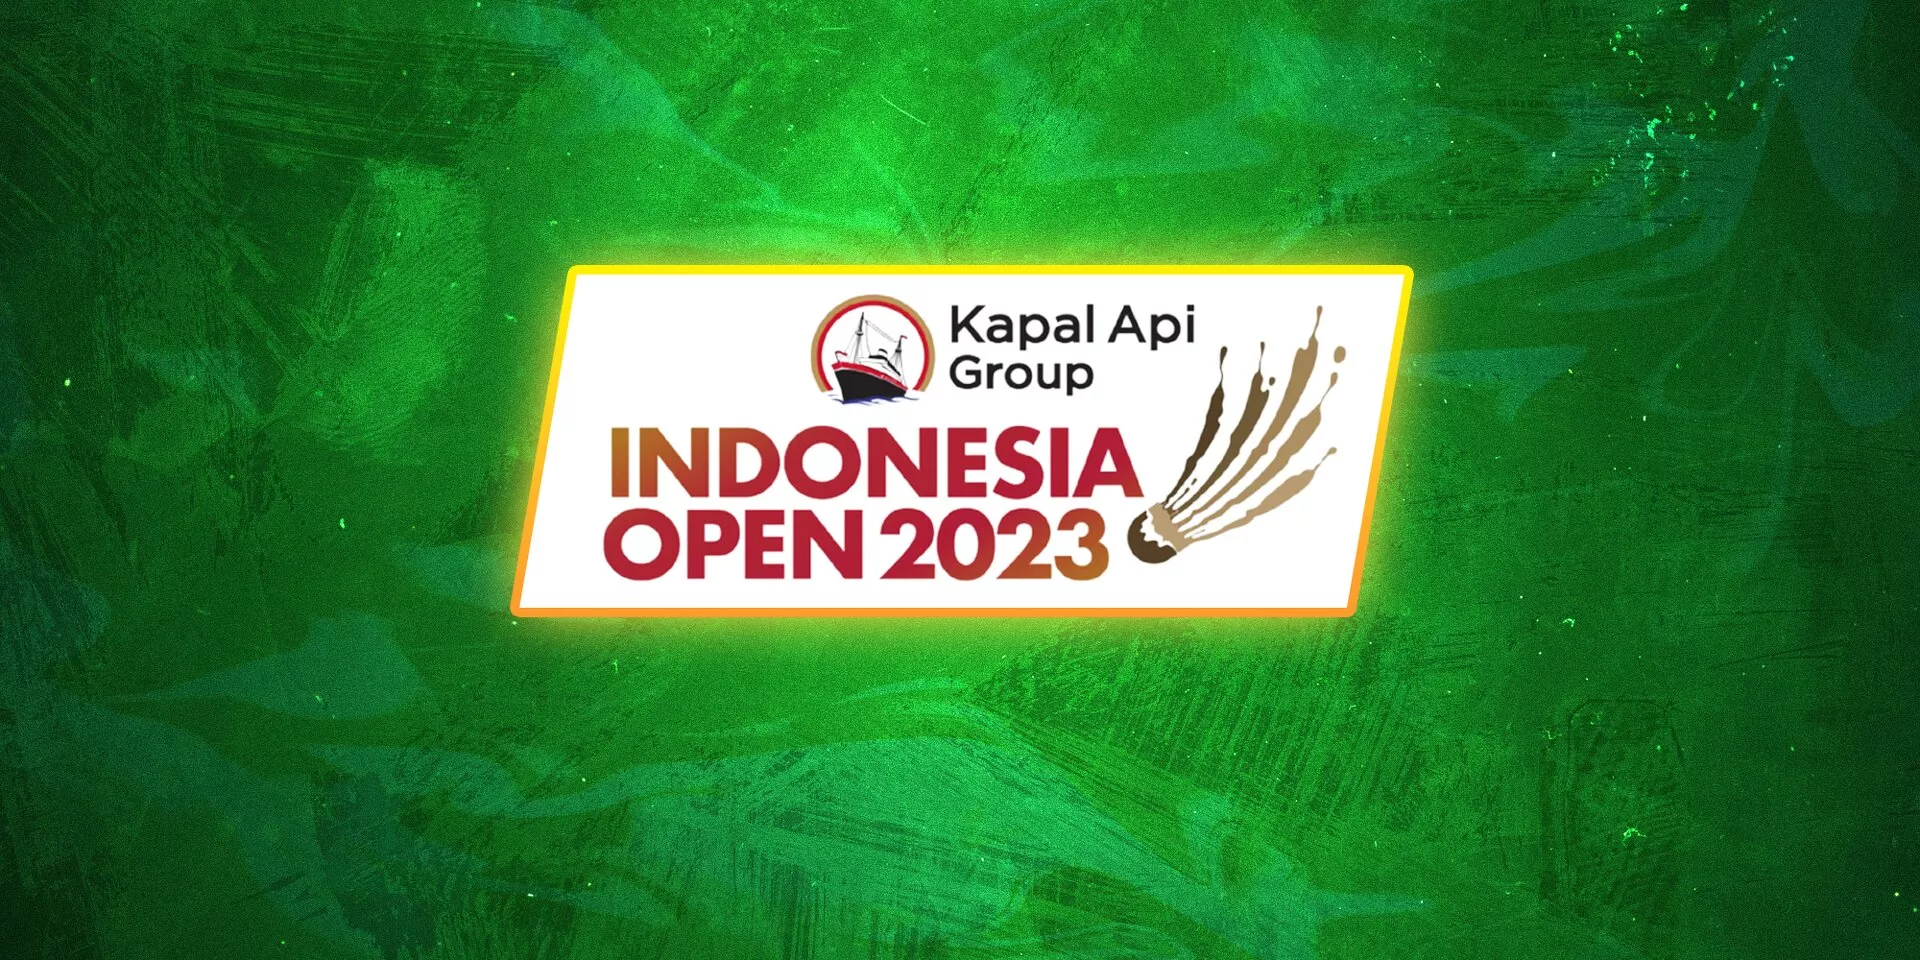 Where and how to watch Indonesia Open 2023 in Indonesia?